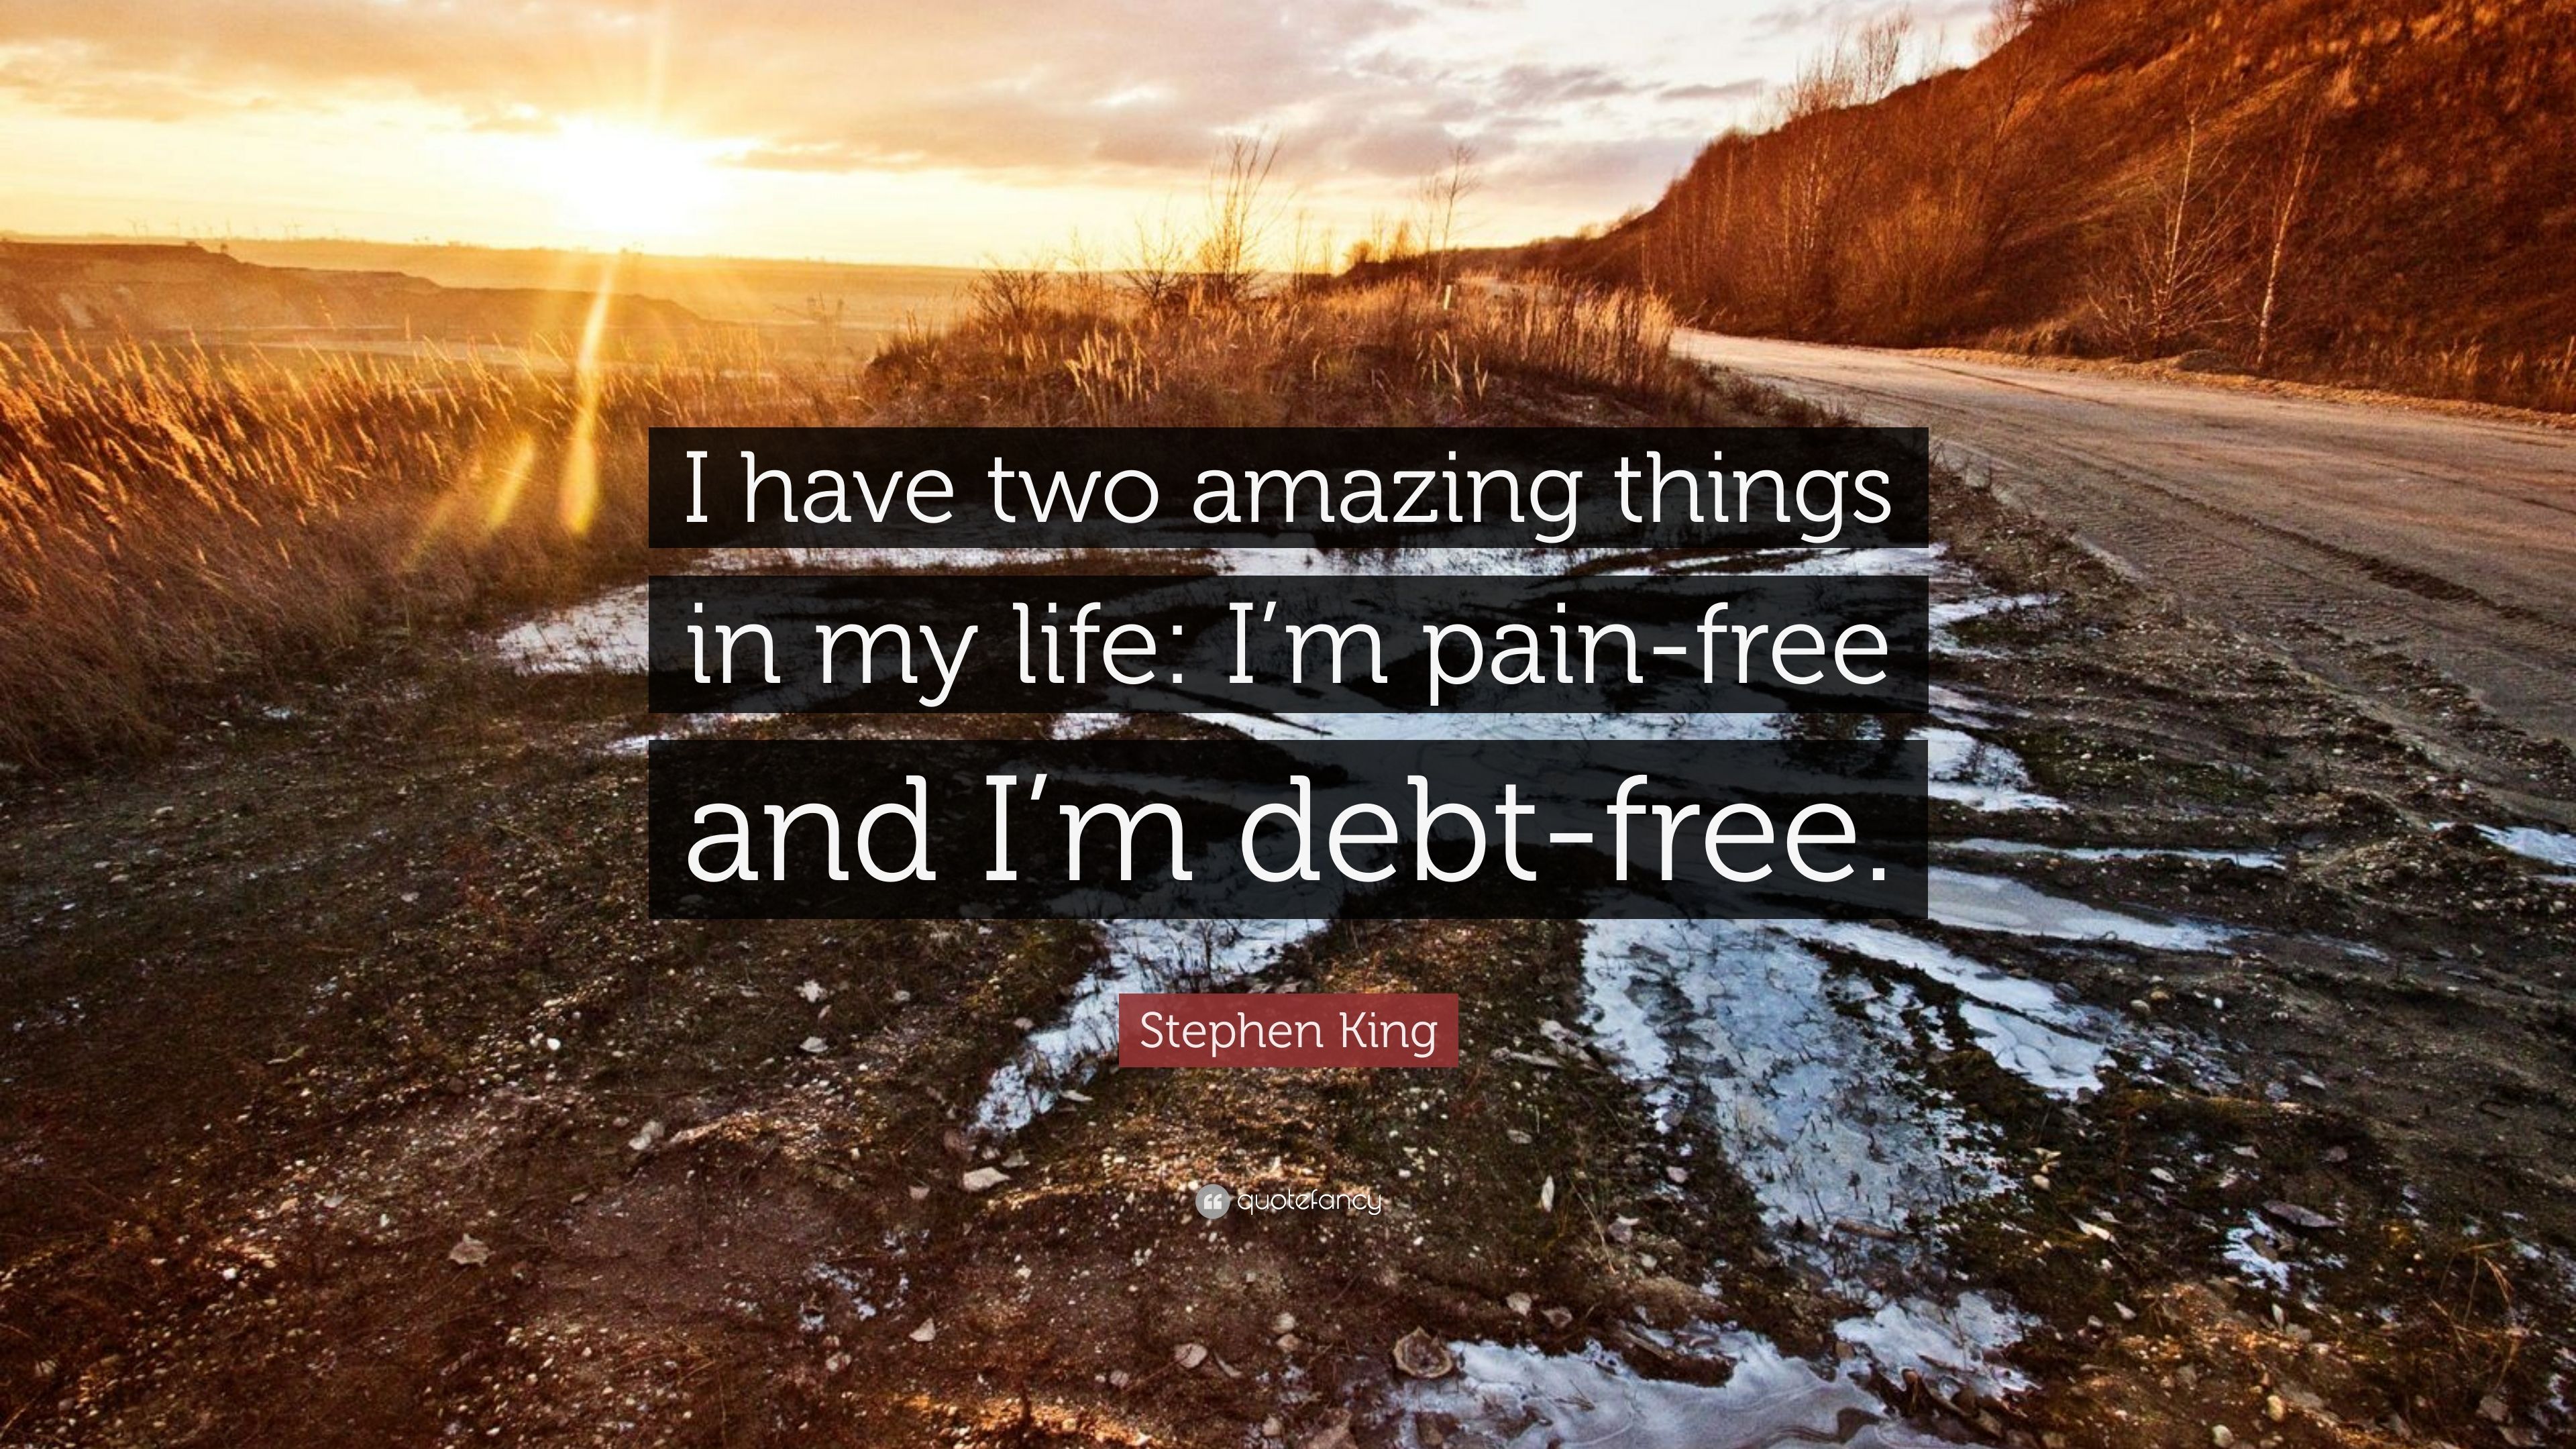 Stephen King Quote: “I Have Two Amazing Things In My Life: I'm Pain Free And I'm Debt Free.” (12 Wallpaper)